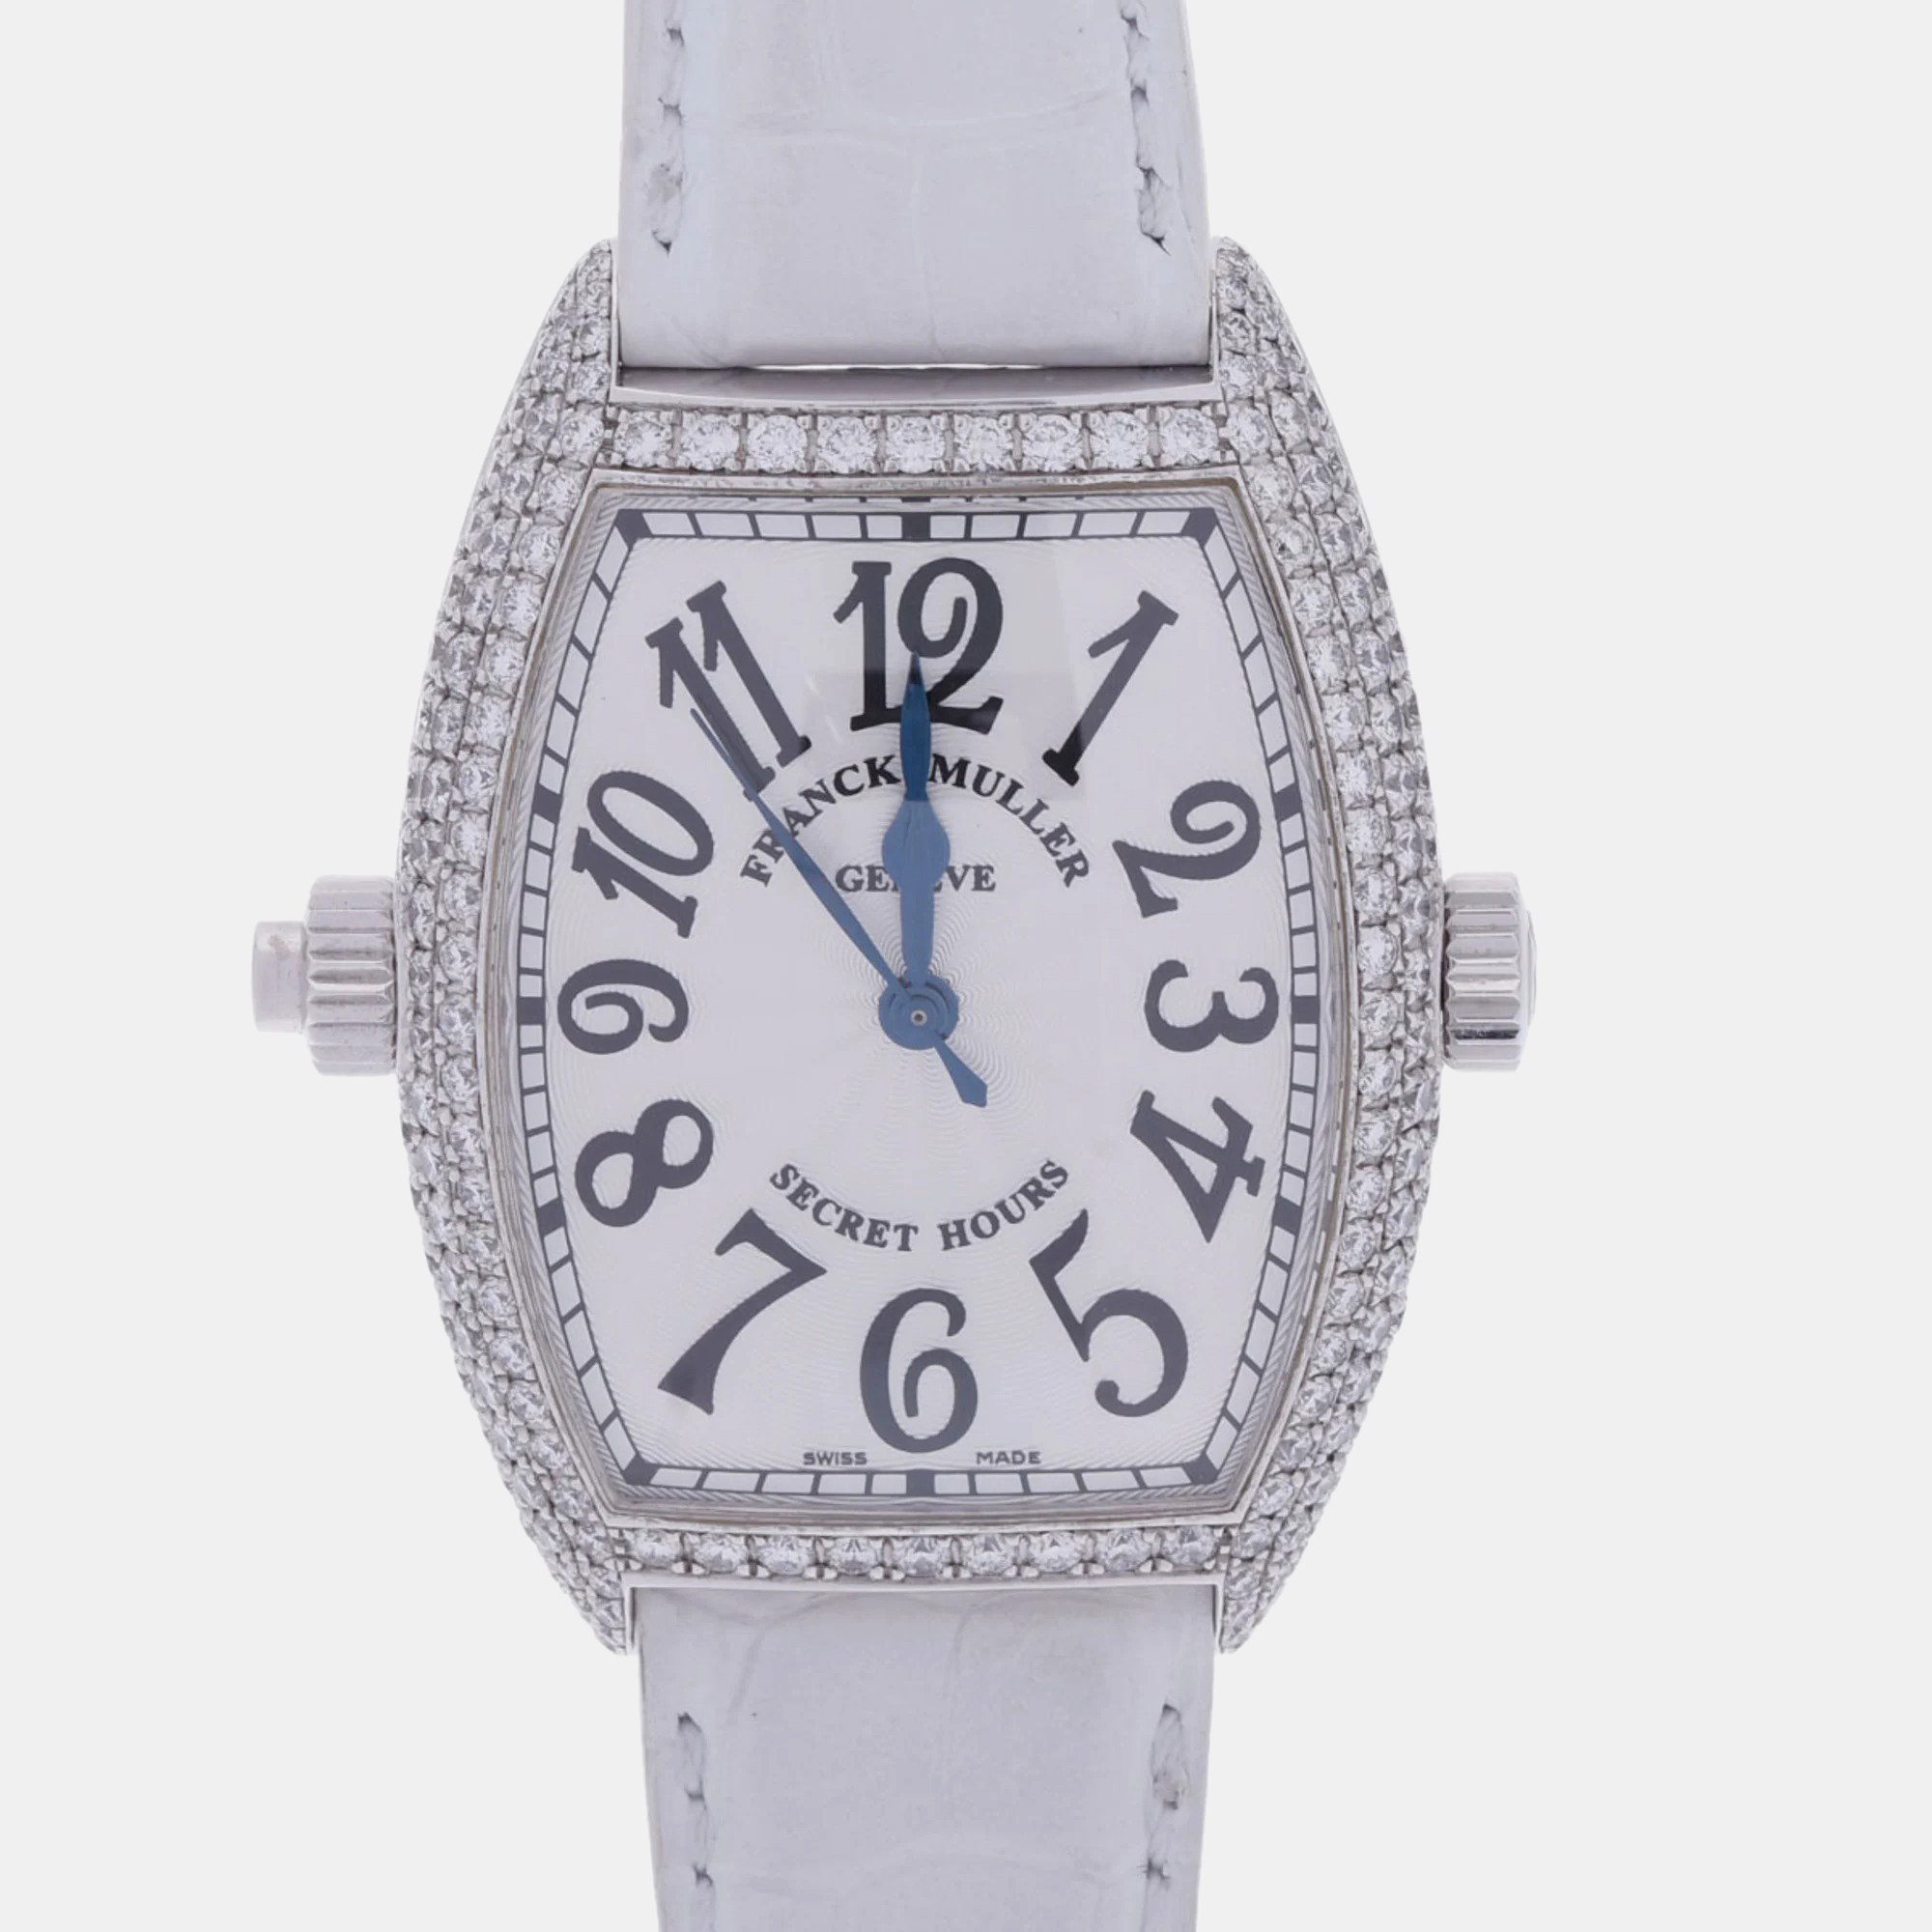 Pre-owned Franck Muller White 18k White Gold Secret Hours 7880sehid Automatic Men's Wristwatch 32 Mm